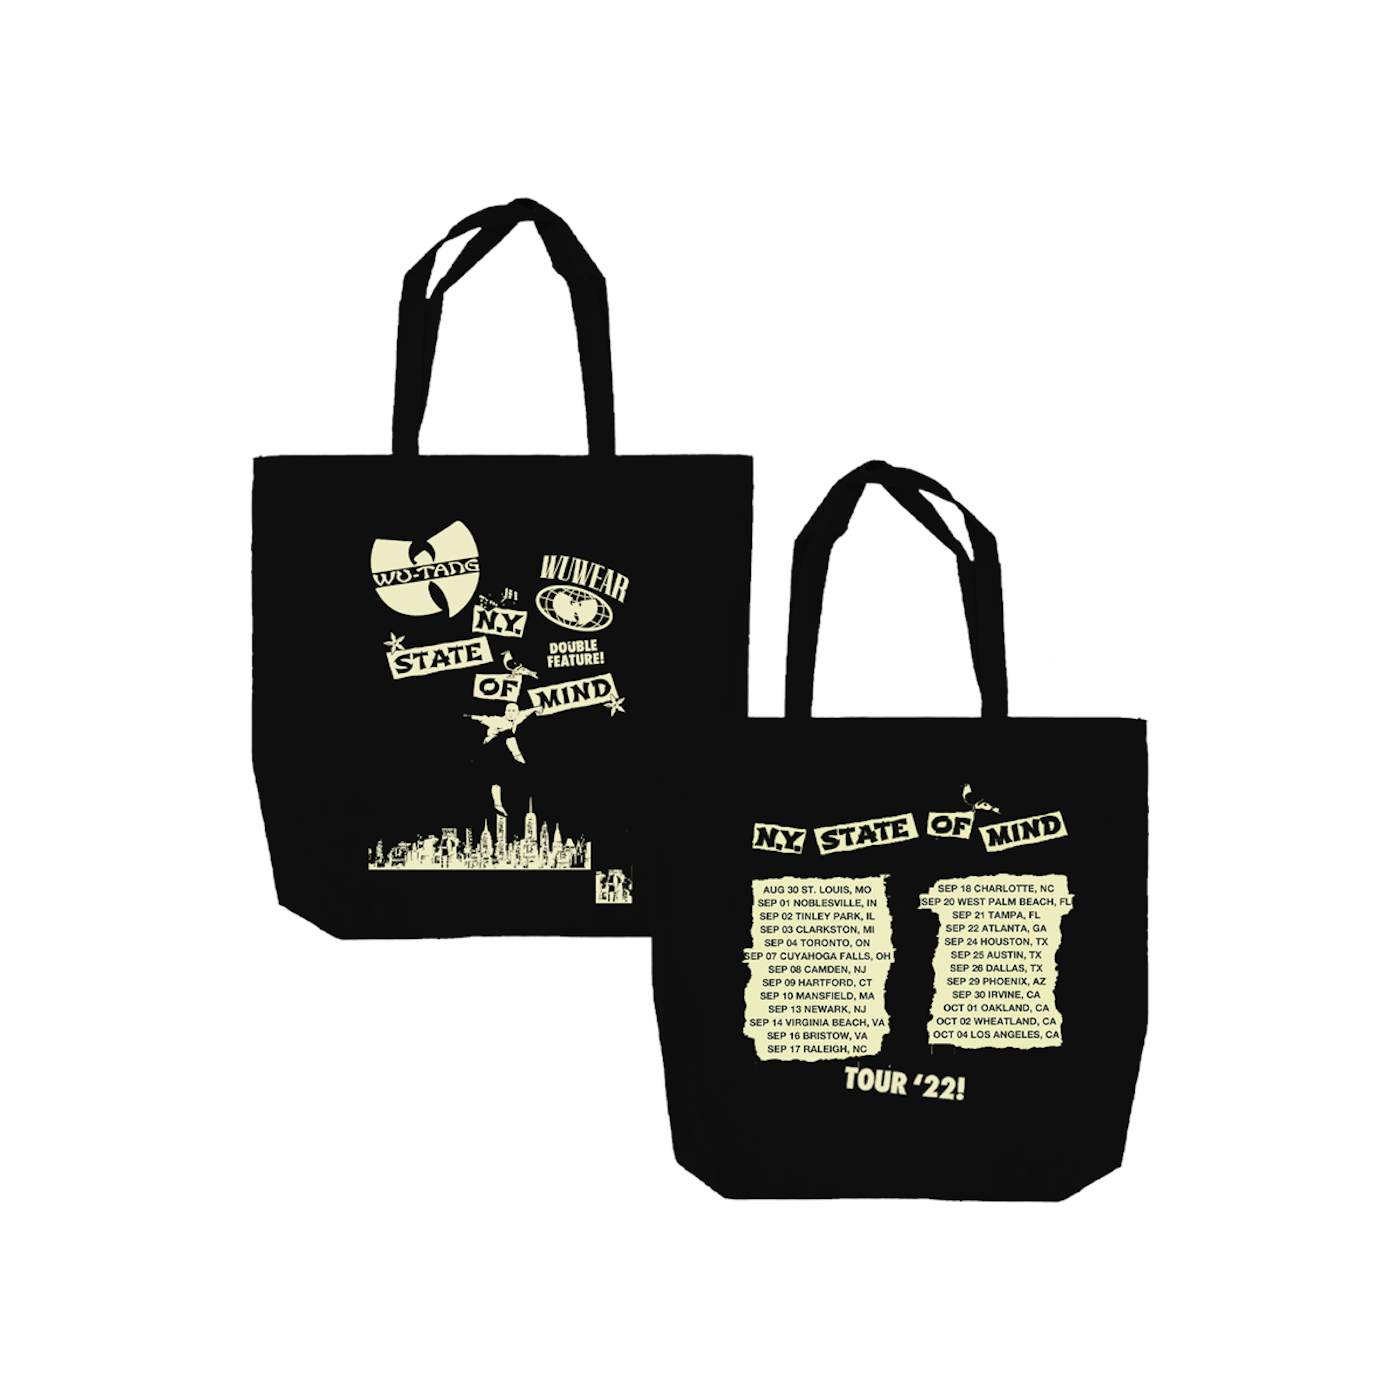 Wu-Tang Clan NY State of Mind Tour Tote